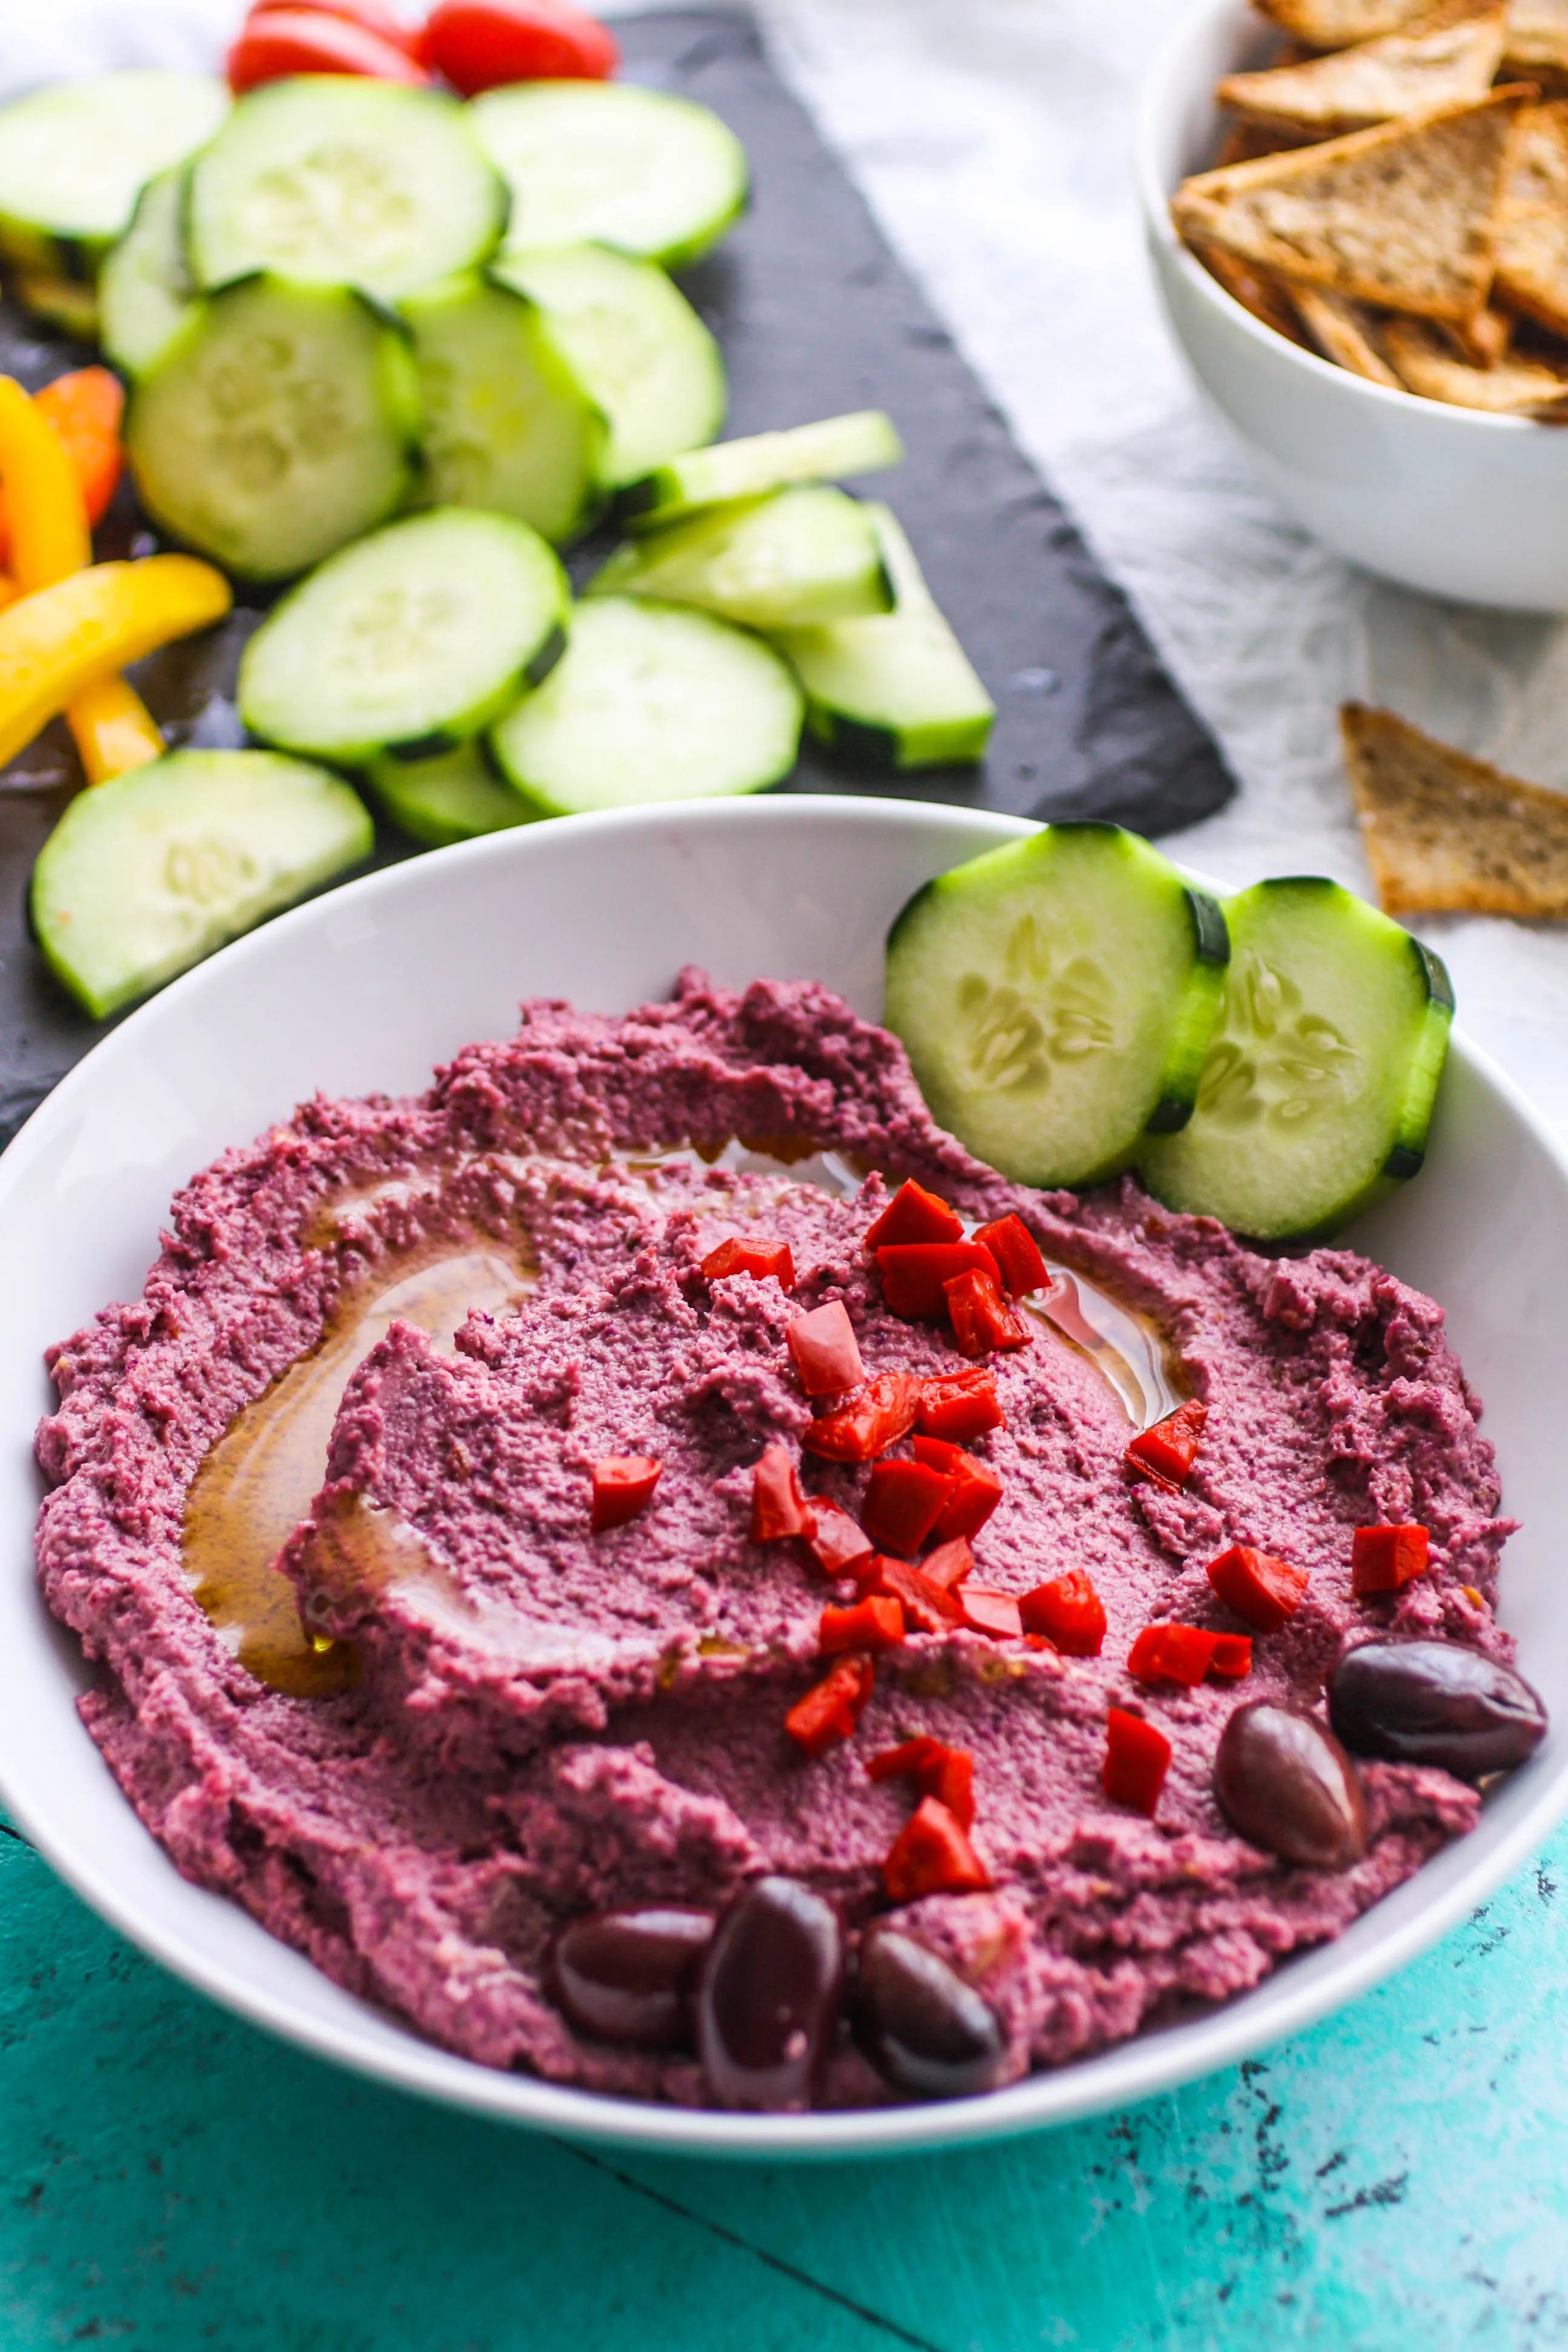  Roasted Garlic and Purple Cauliflower Hummus is a fun dip to serve anytime. Roasted Garlic and Purple Cauliflower Hummus is easy to make, and so colorful for a fun snack!